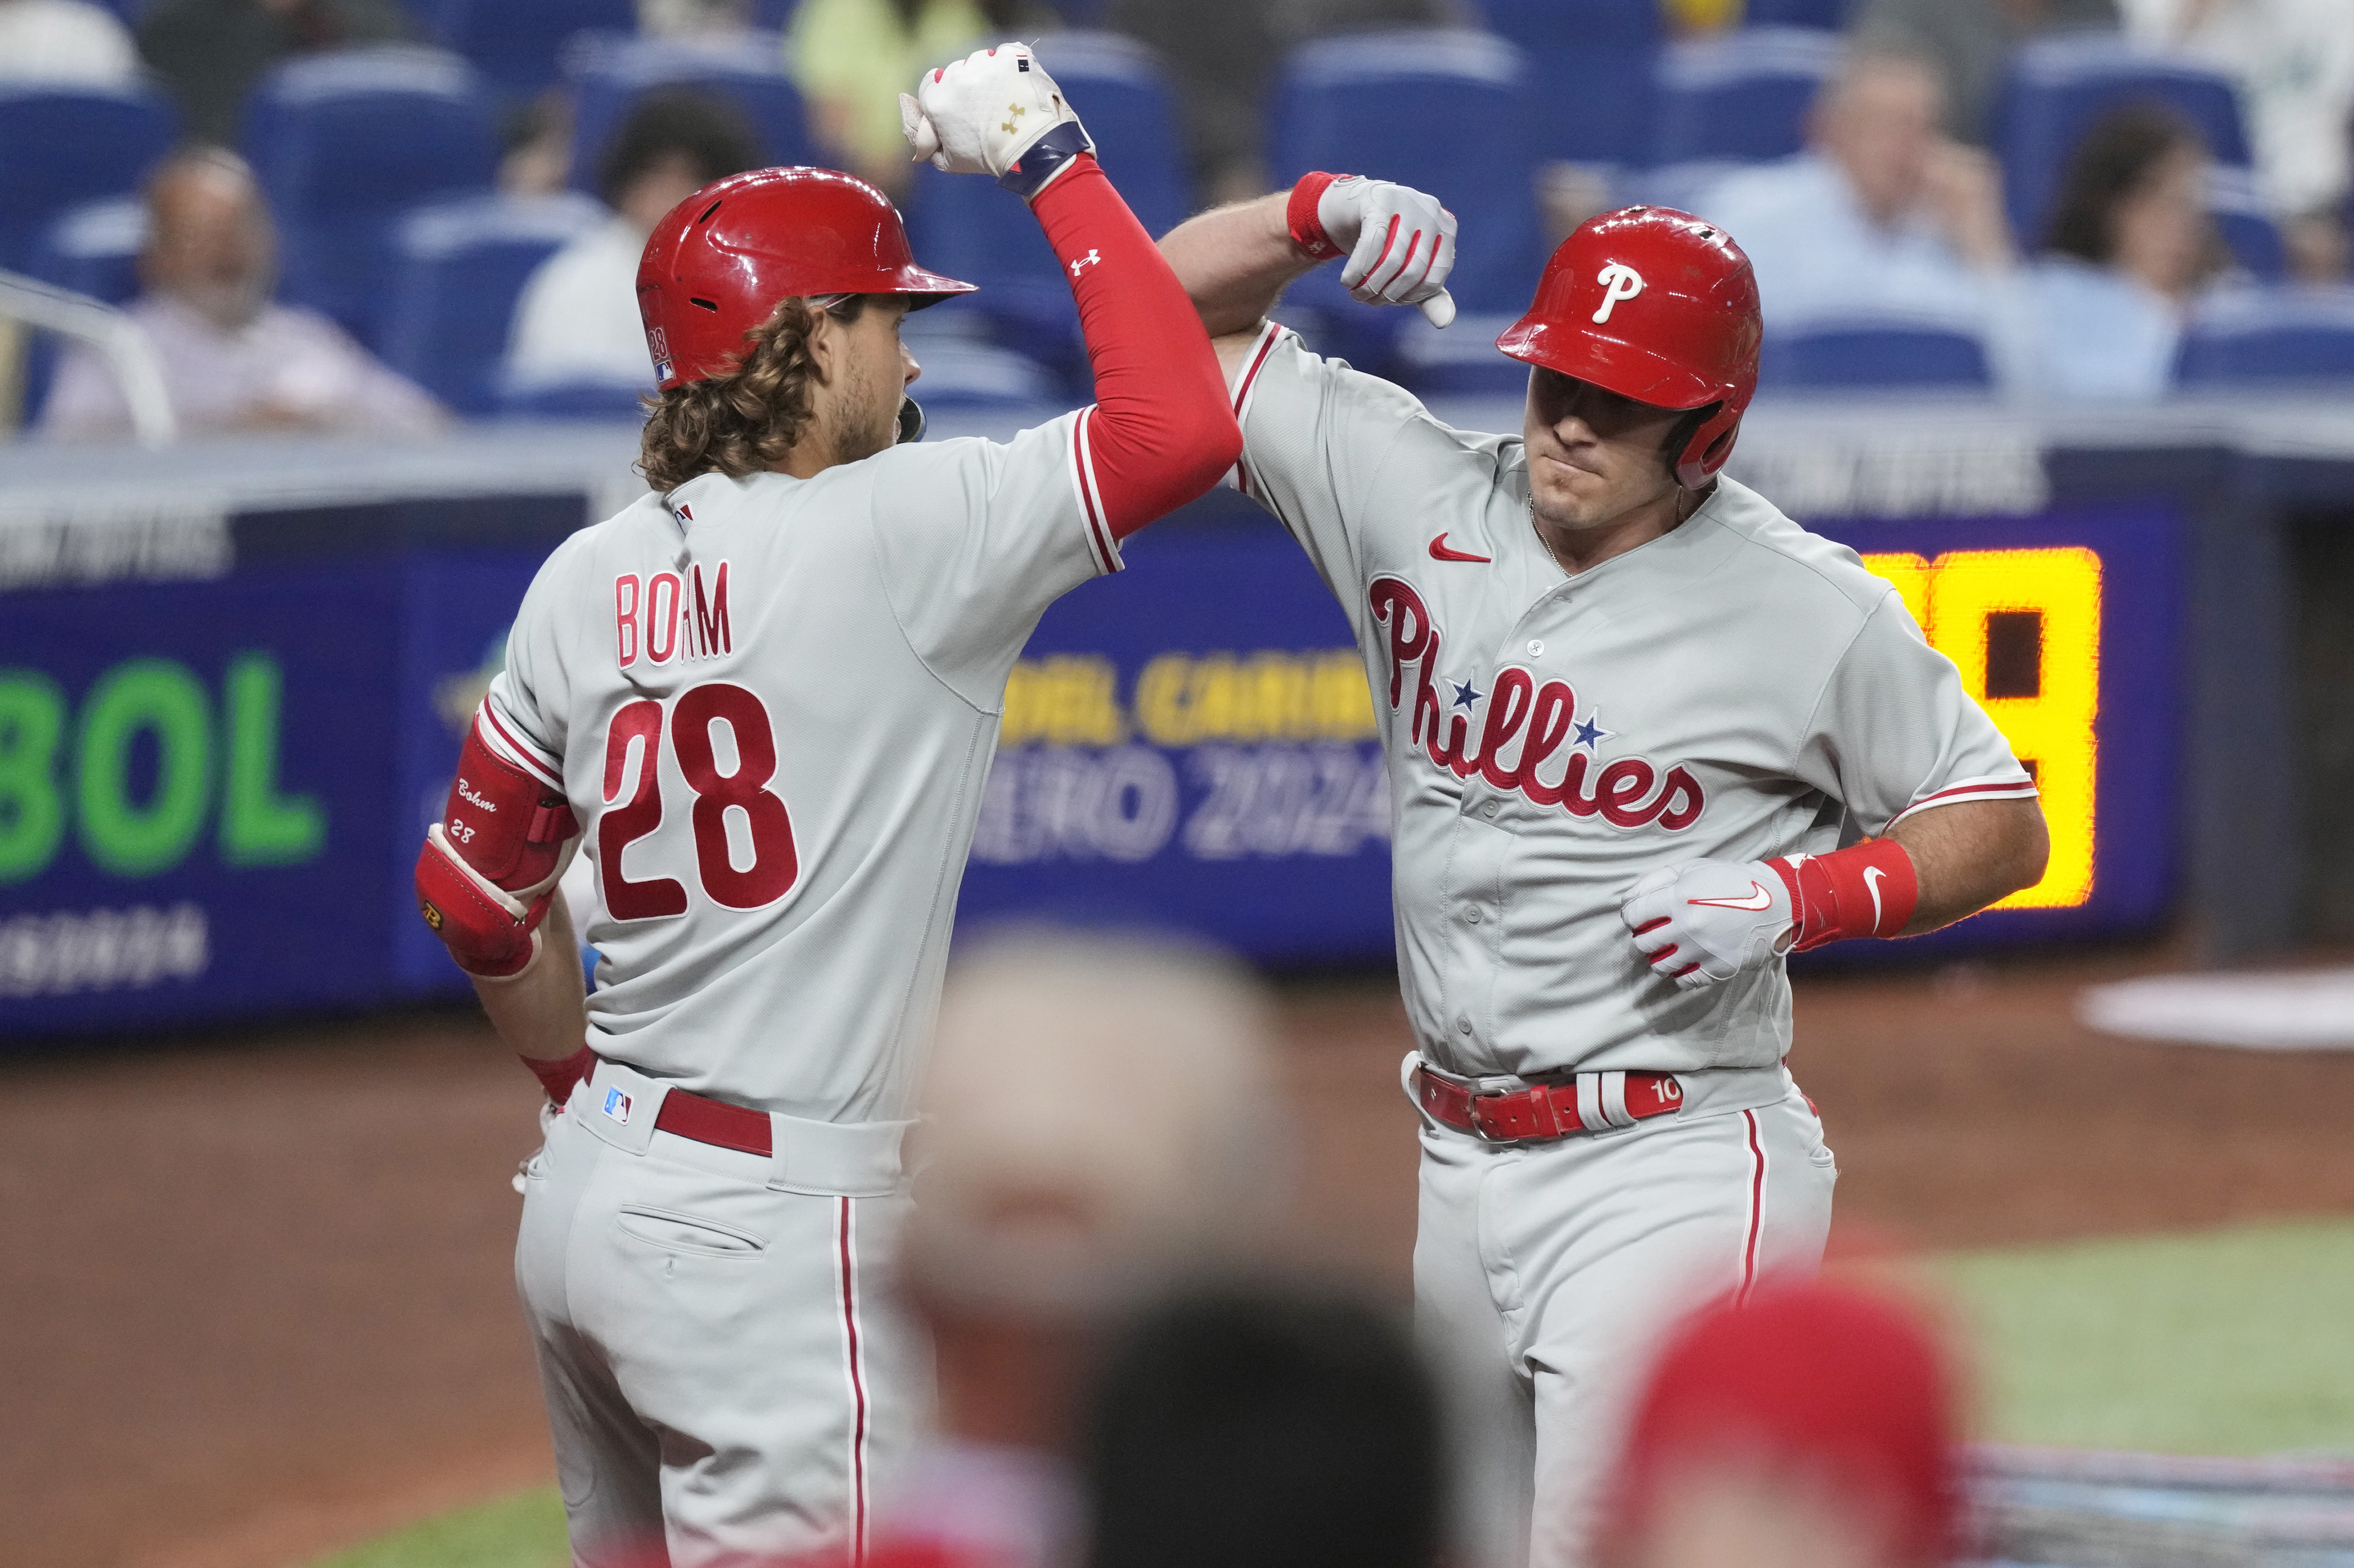 Phils Saturday Night Specials: Shoulda Stayed 'One and Done